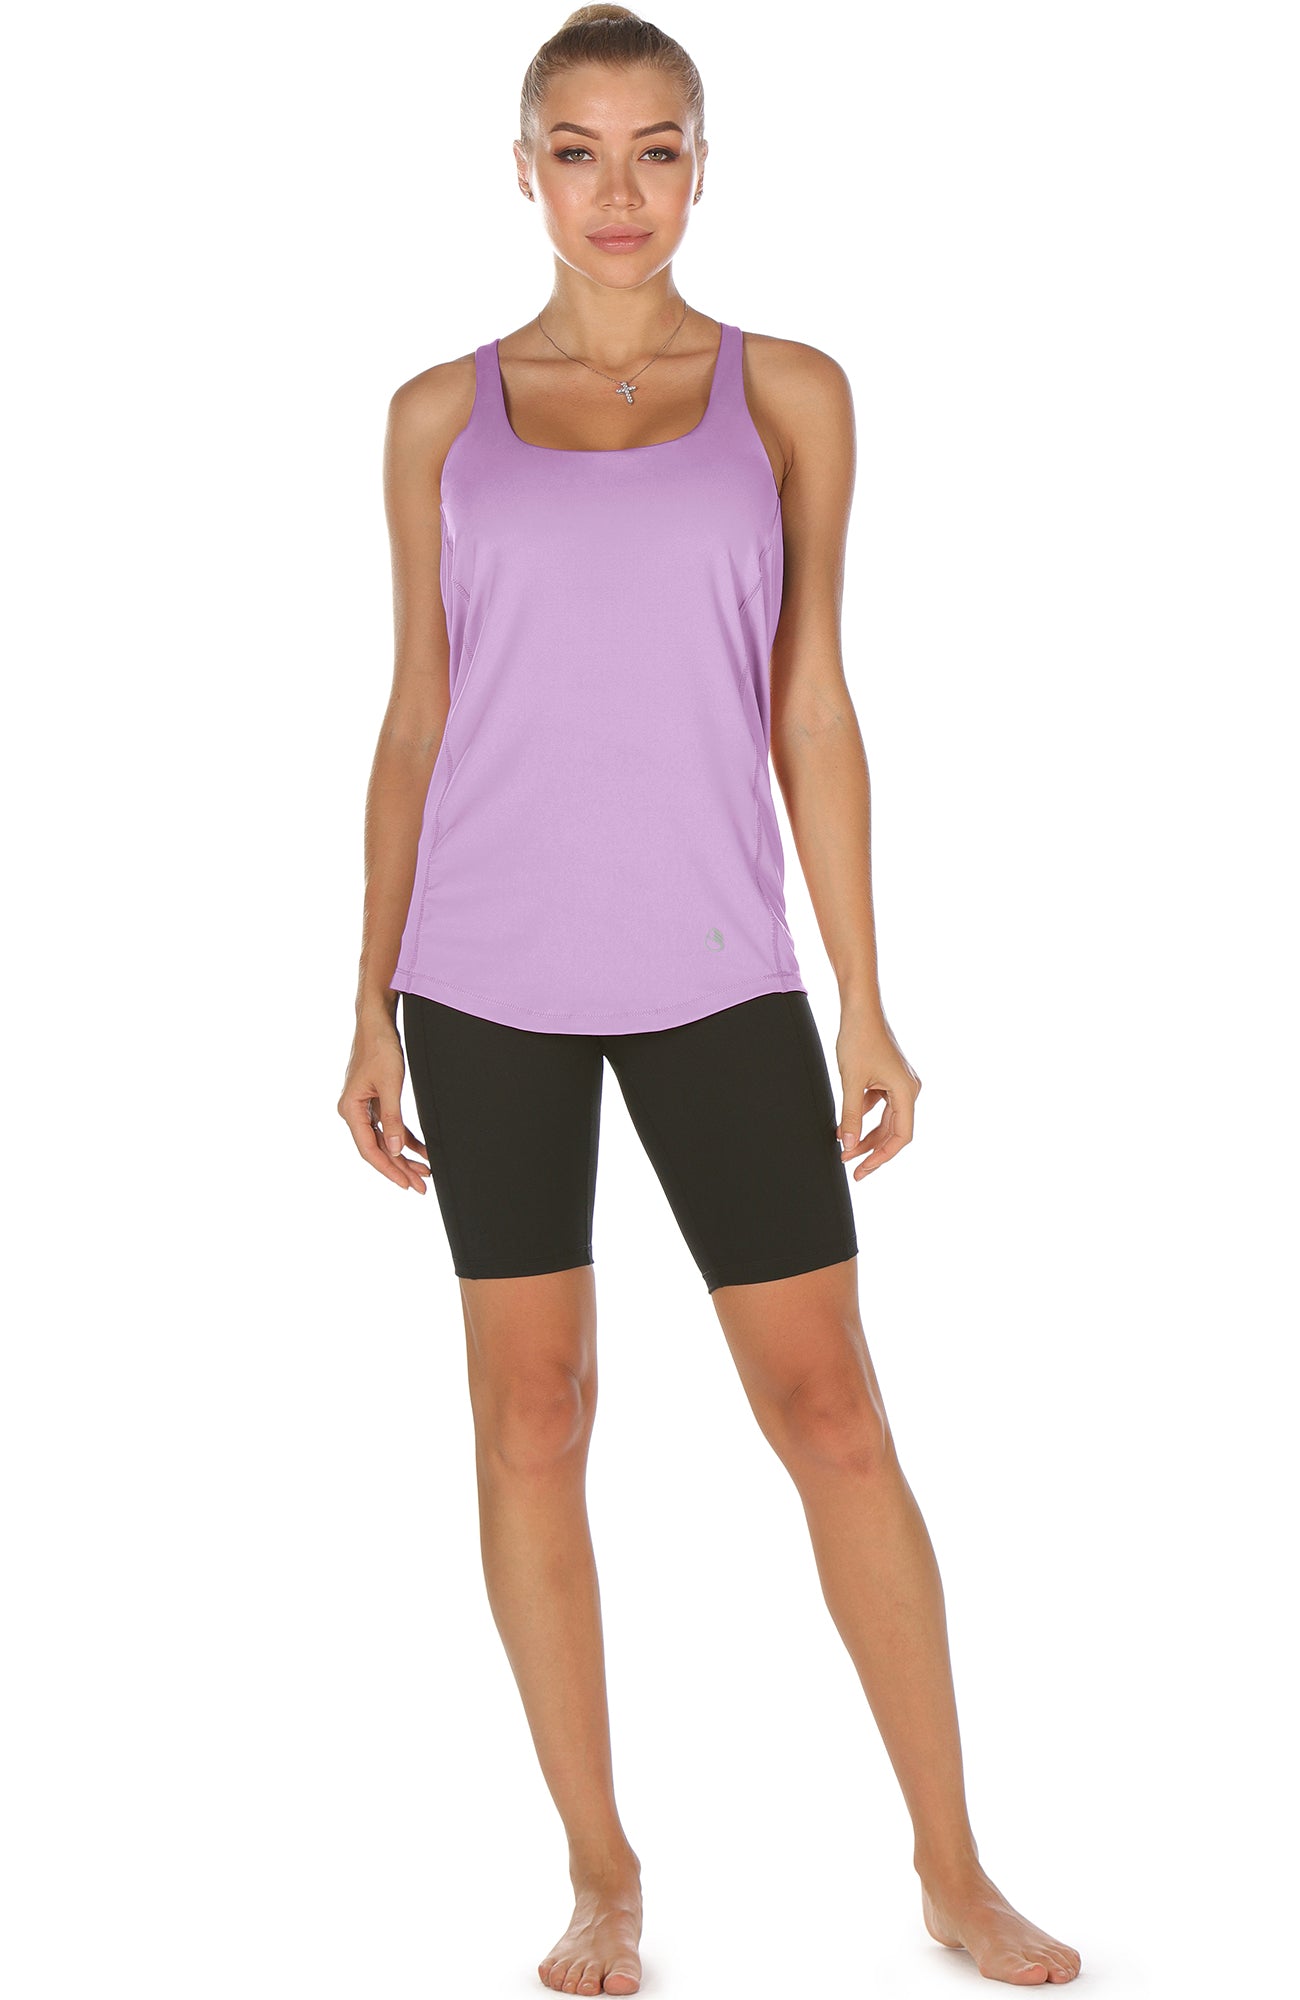 icyzone Workout Tank Tops Built in Bra - Women's Strappy Athletic Yoga Tops,  Exe